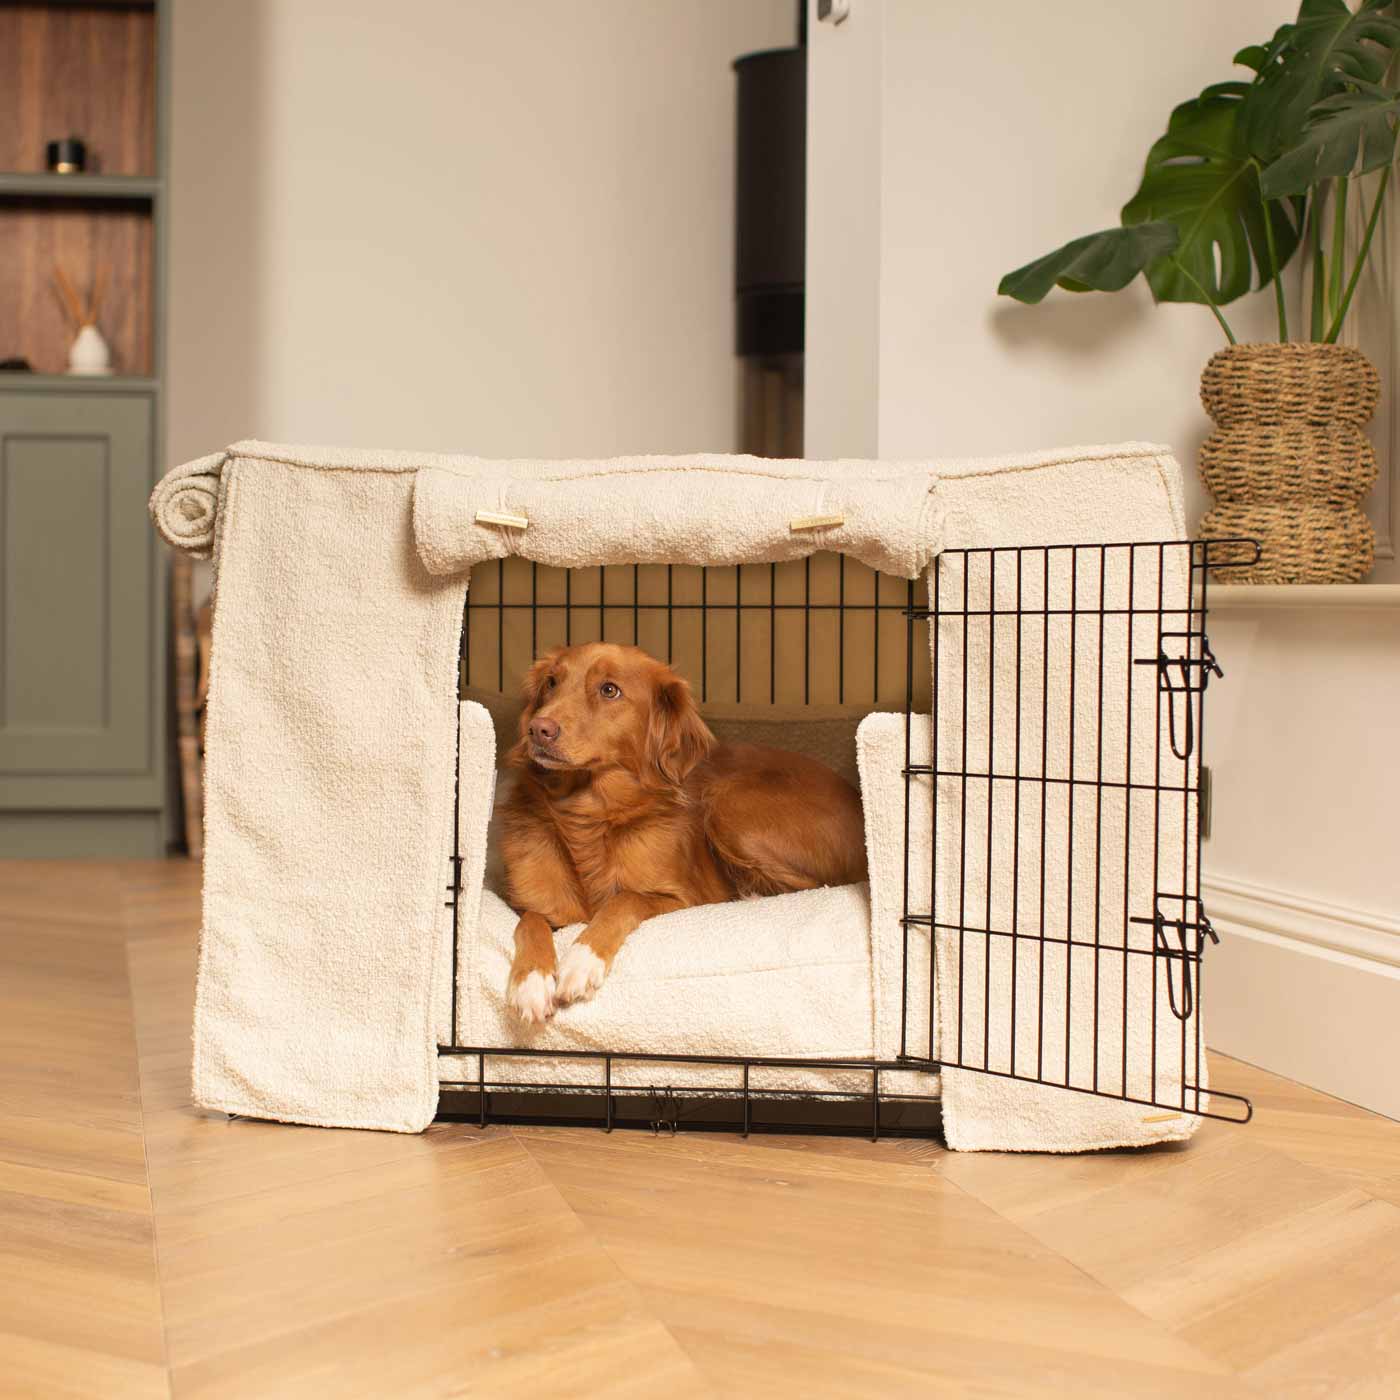 Luxury Heavy Duty Dog Crate, In Stunning Ivory Bouclé Crate Set, The Perfect Dog Crate Set For Building The Ultimate Pet Den! Dog Crate Cover Available To Personalise at Lords & Labradors